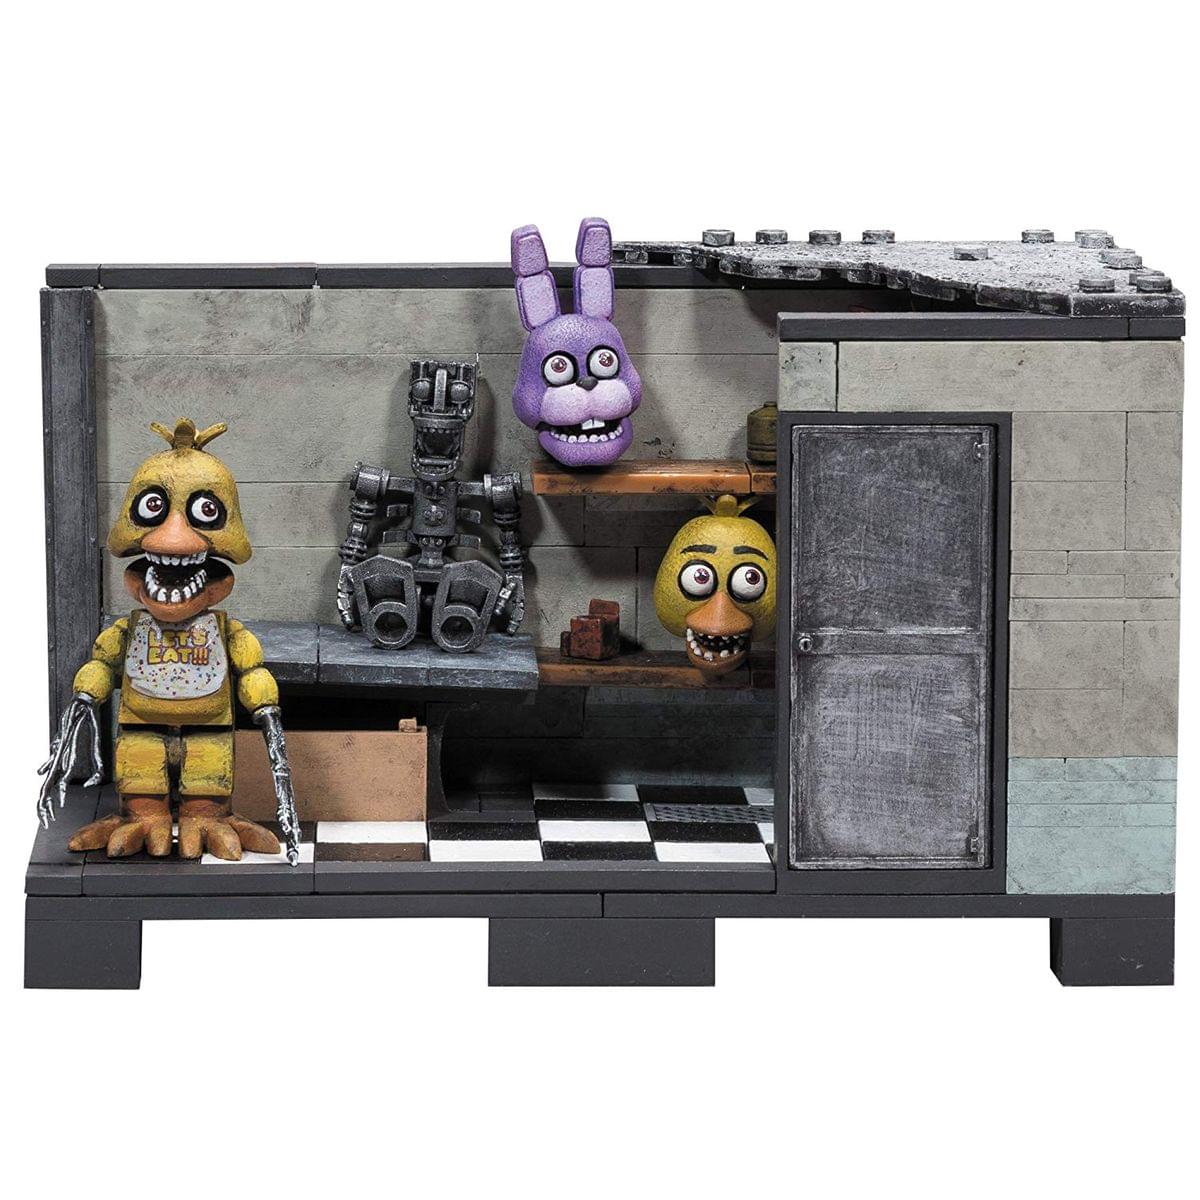 Five Nights At Freddy's Classic Series Backstage 153-Piece Medium Construction Set